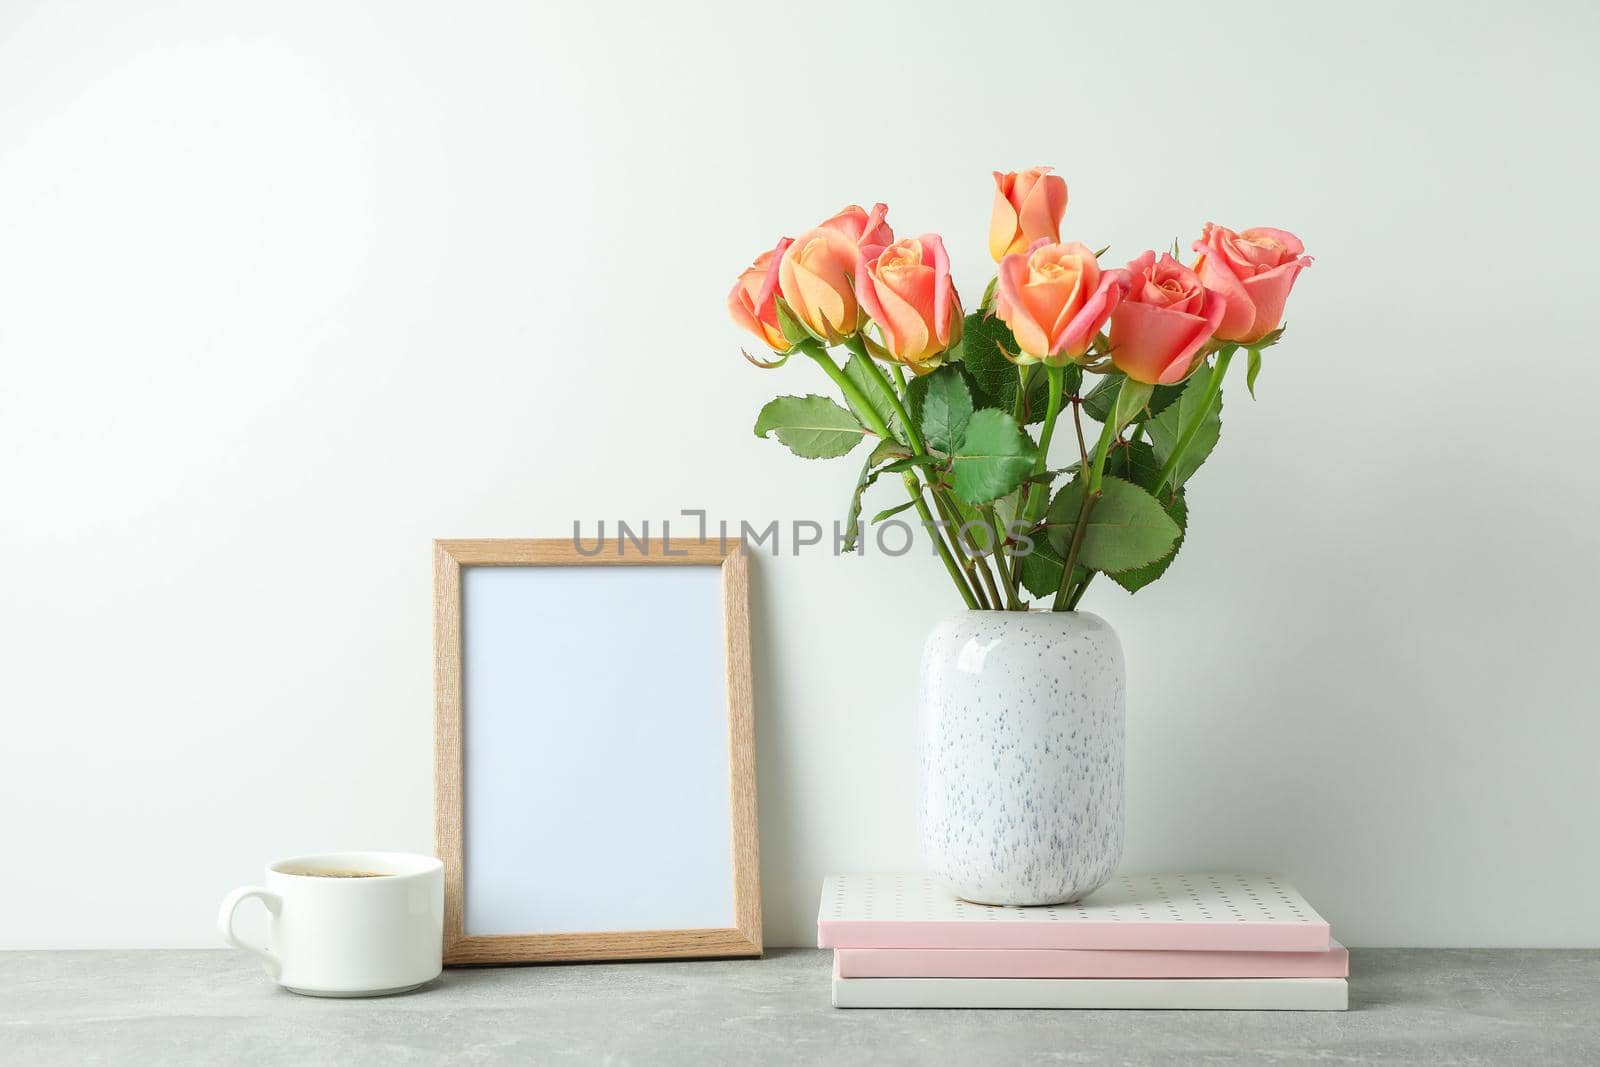 Vase with pink roses, copybooks, empty frame, cup of coffee on grey table against white background